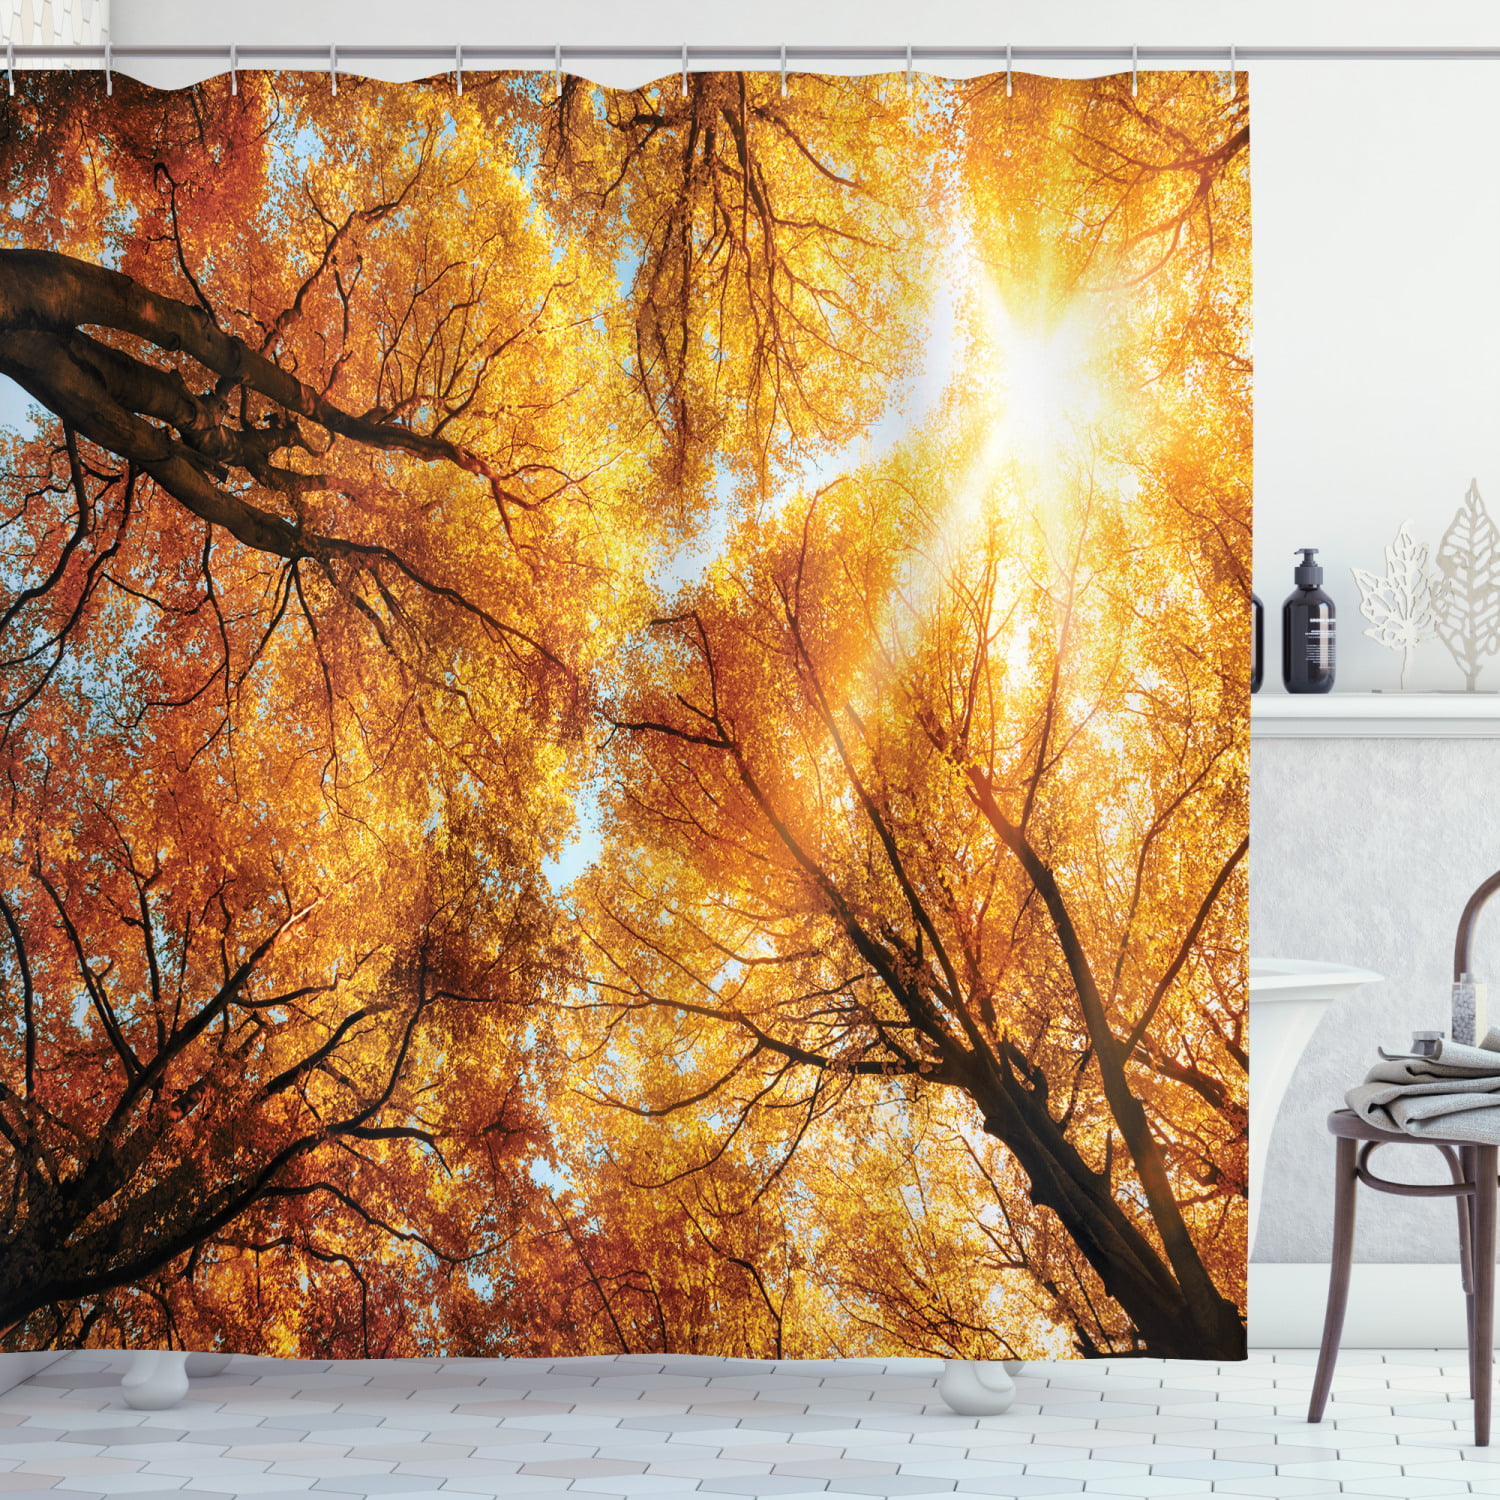 Details about   71" Autumn Red Leaves Tree Forest Bathroom Shower Curtain Waterproof Fabric 